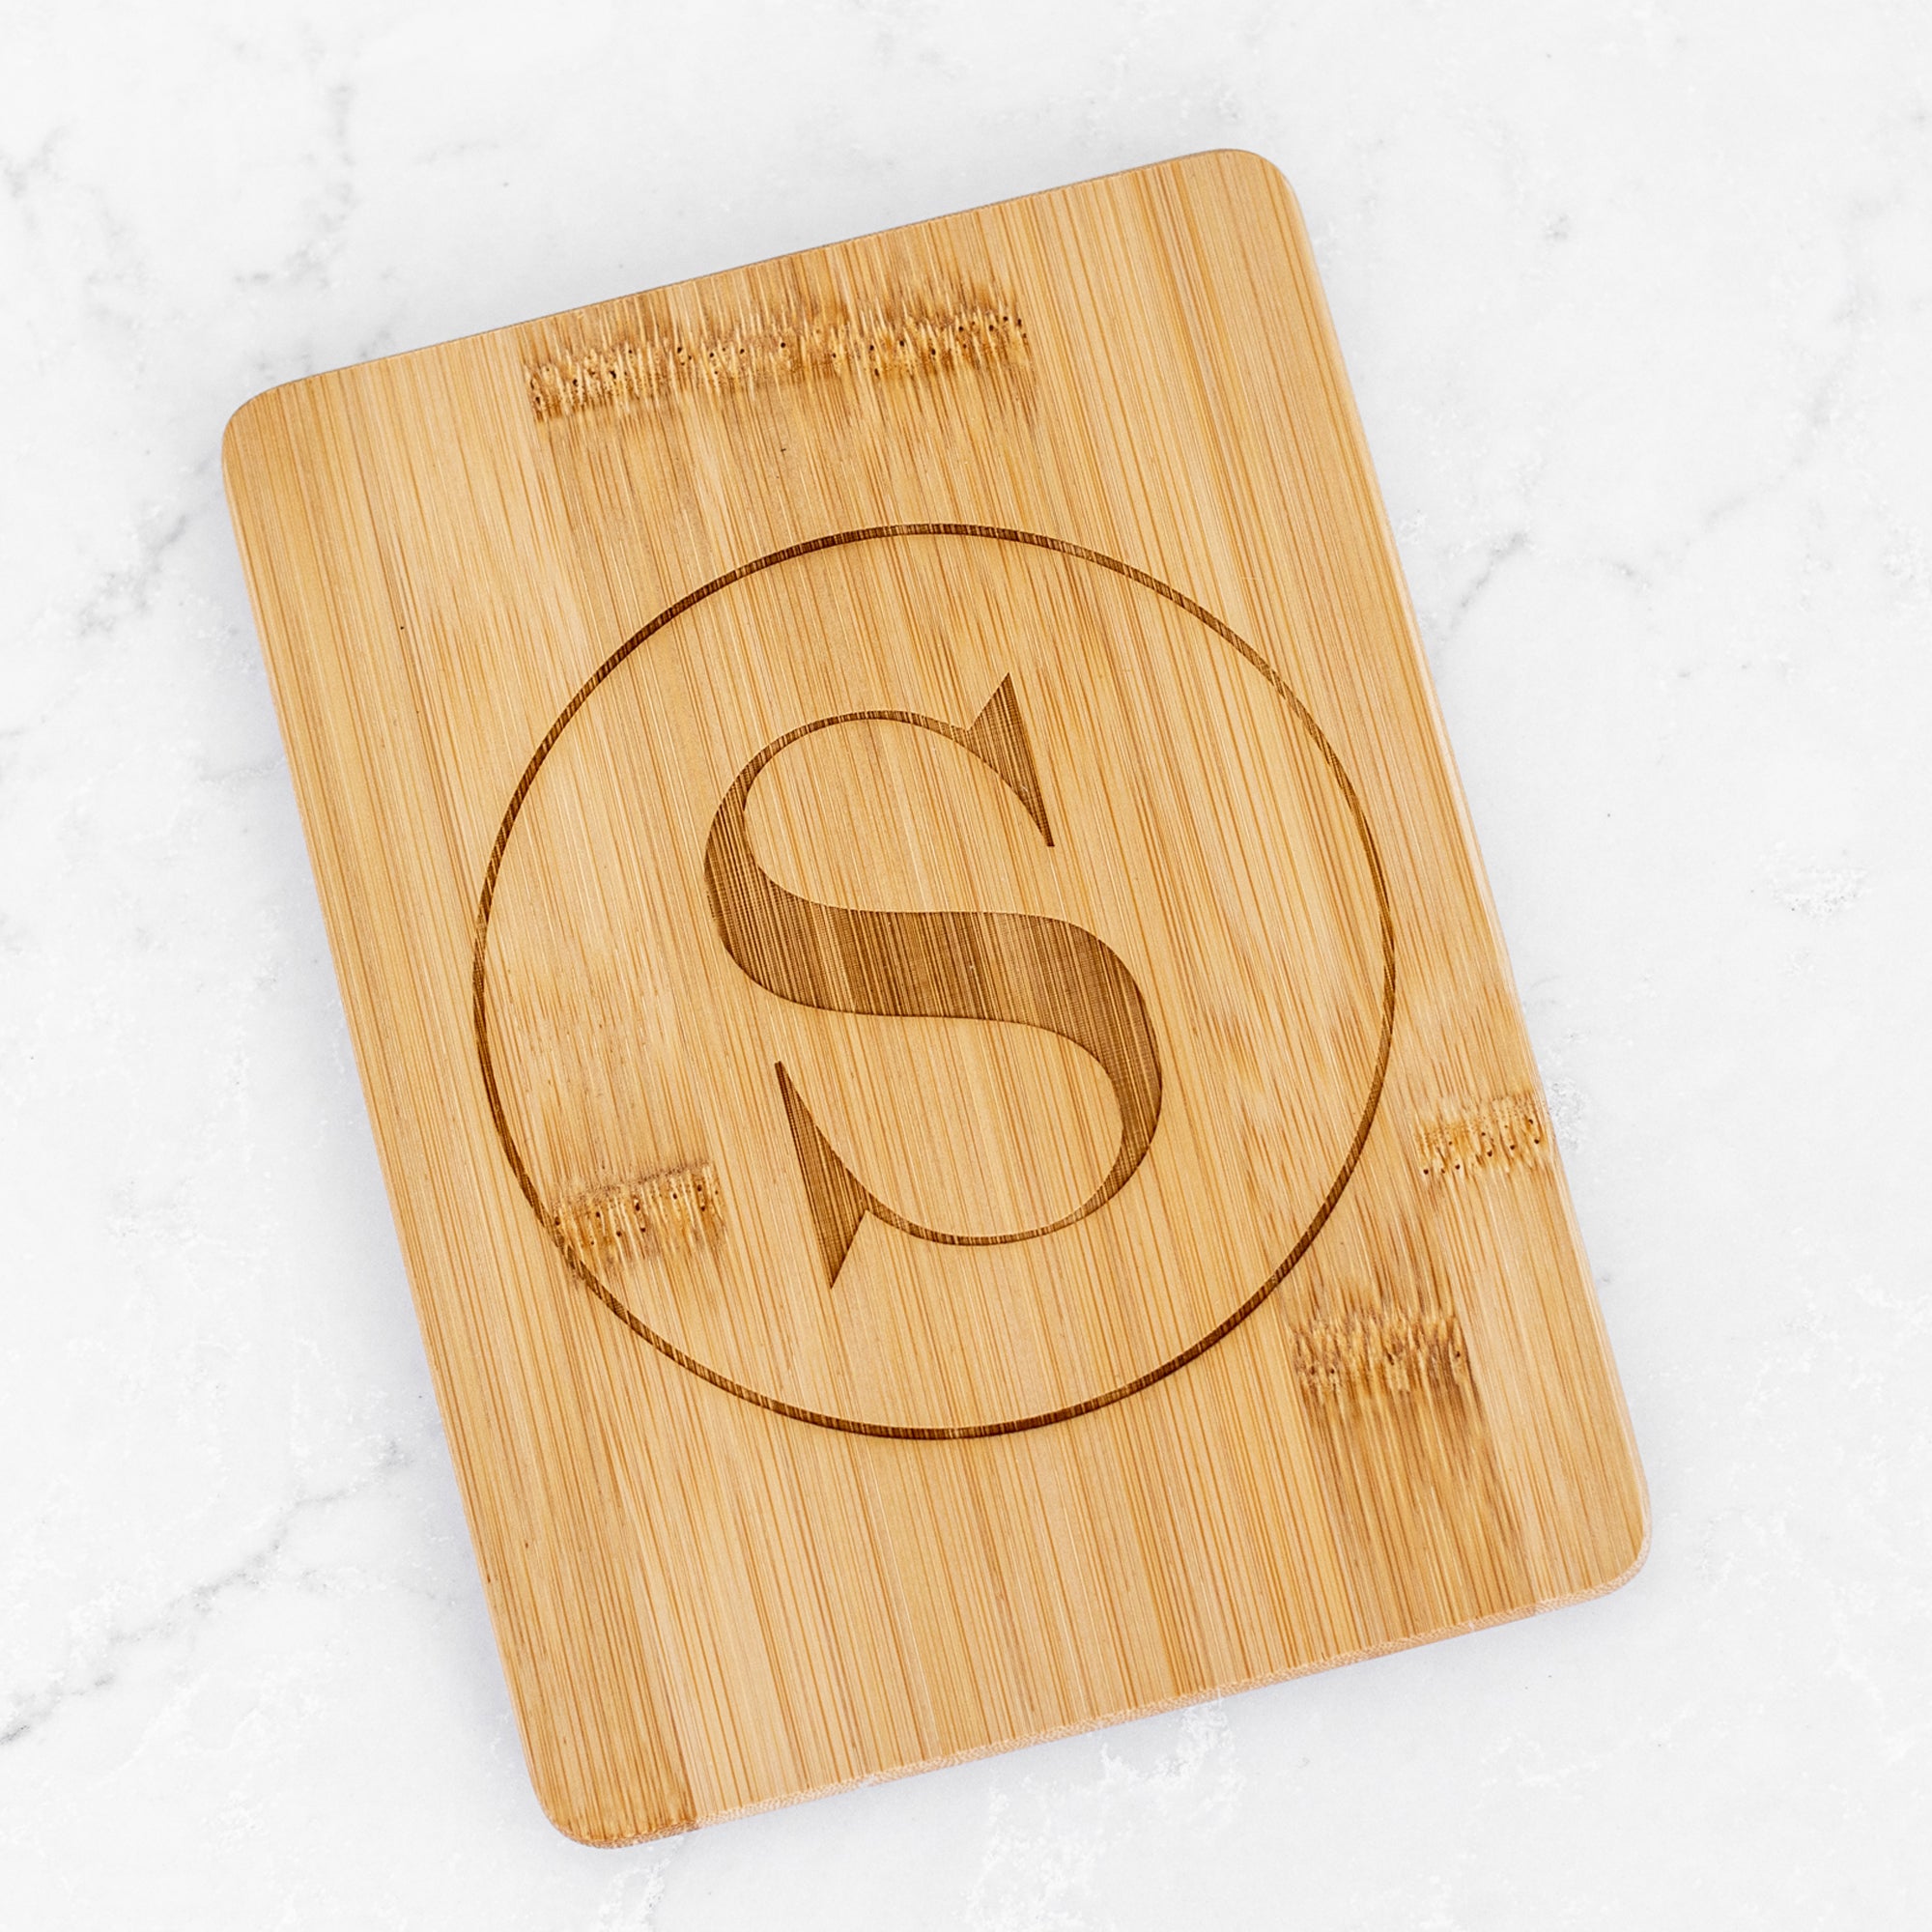 Bamboo Bar Board Engraved with Initial - 6 x 8 inches